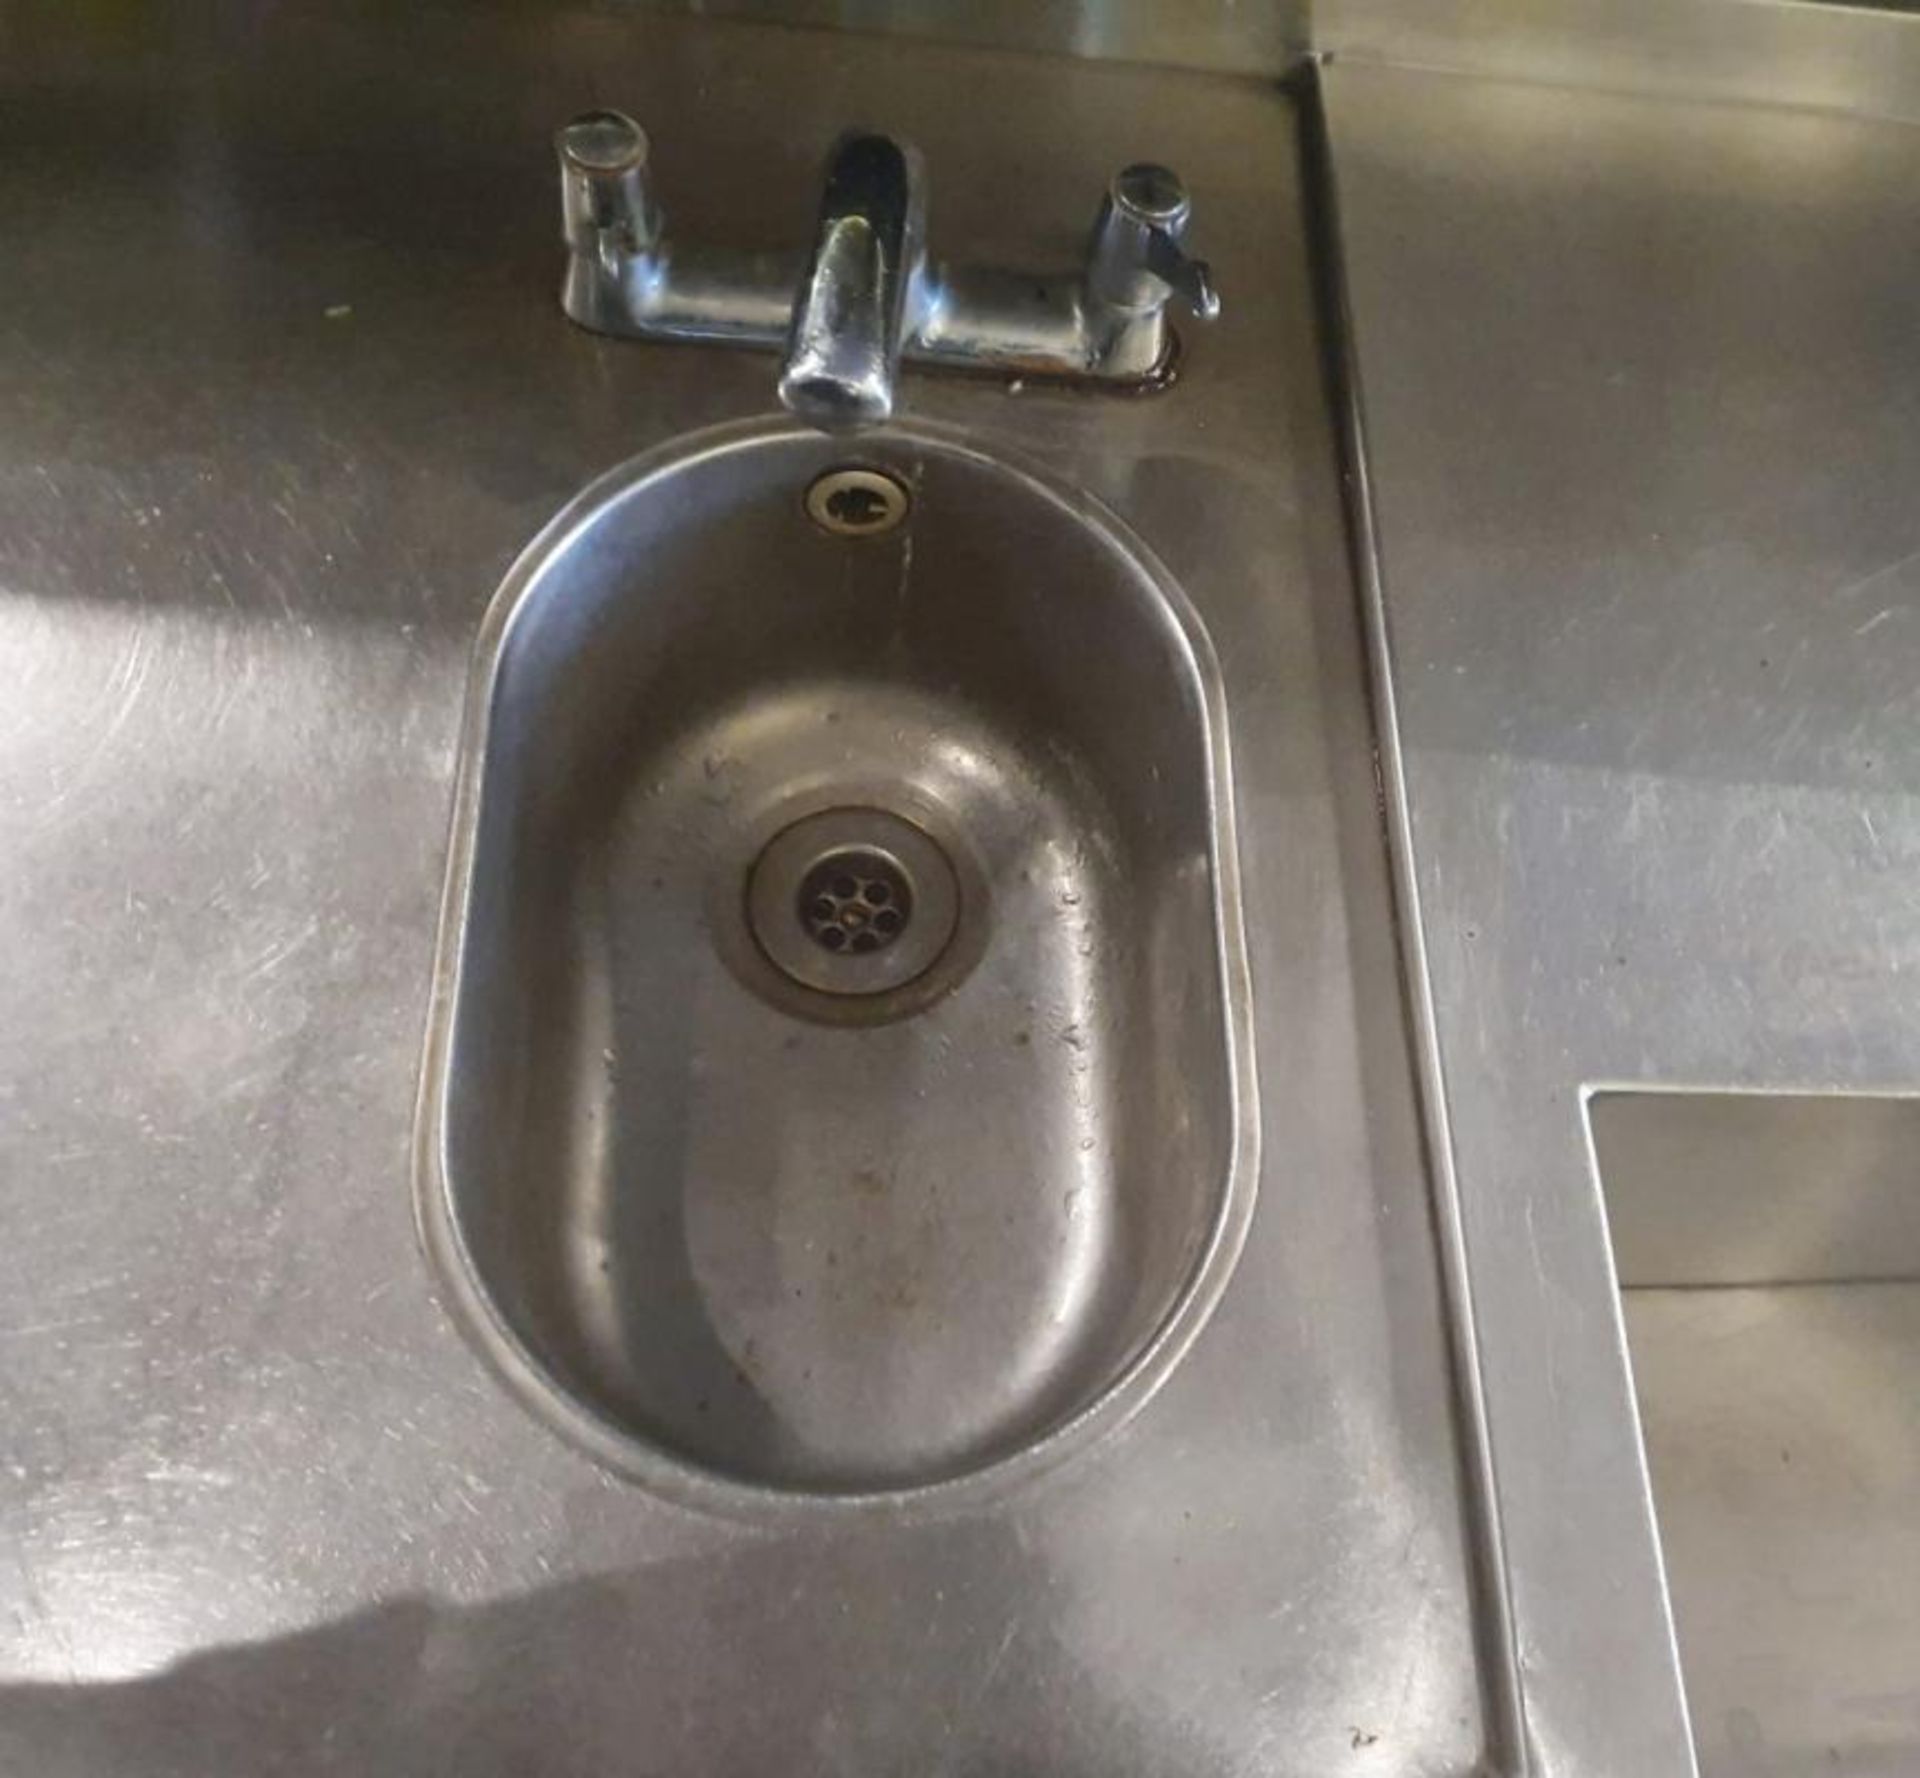 1 x Stainless Steel Back Bar - Features Hand Basins, Ice Wells With Bottle Speed Rails and More - Di - Image 6 of 10